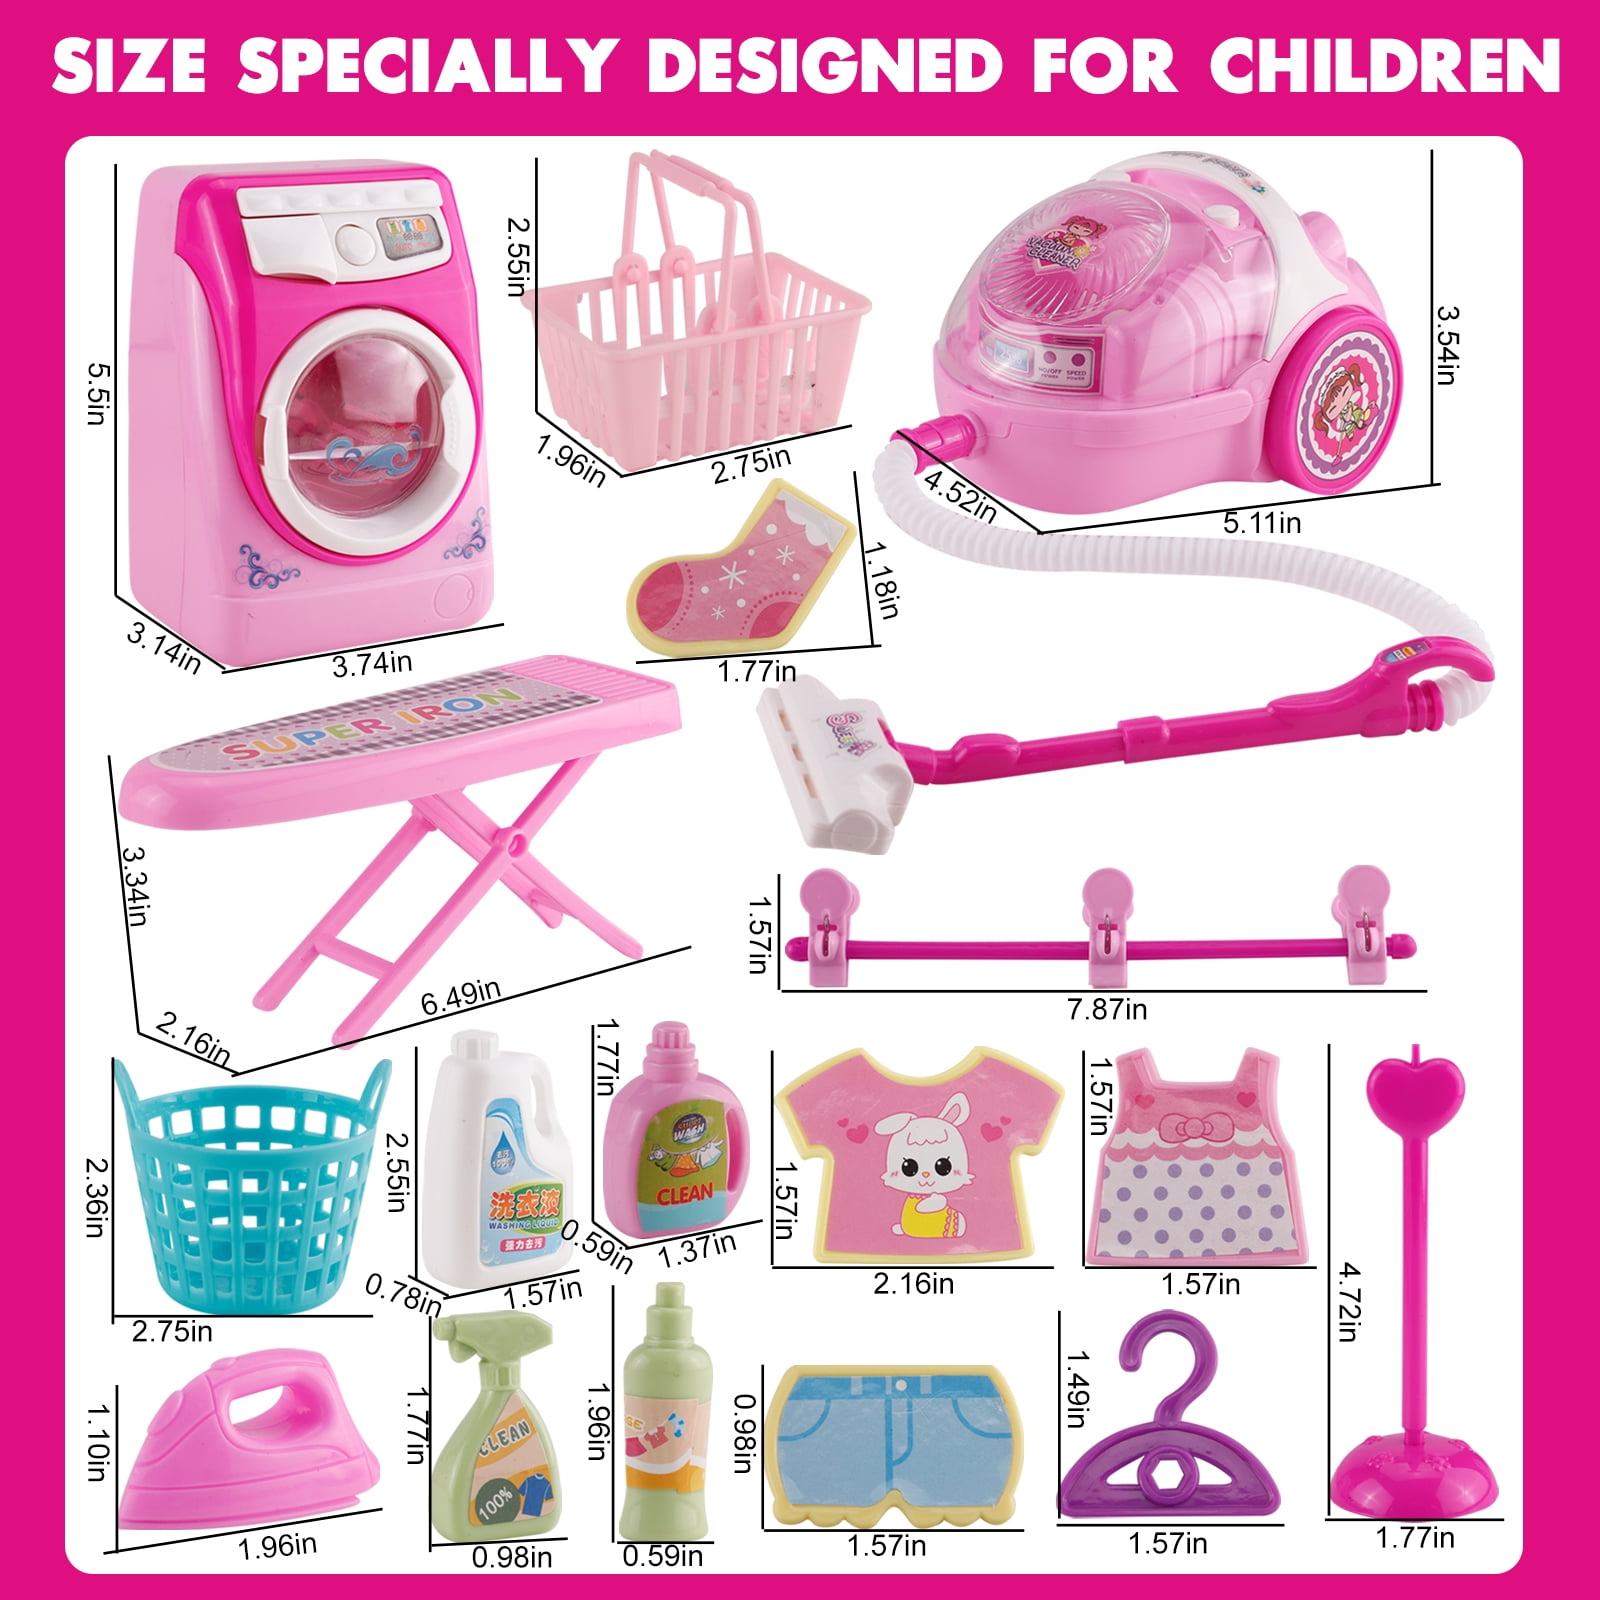 NETNEW Kids Cleaning Set Toys for Girls Boys 3-6 Years Pretend